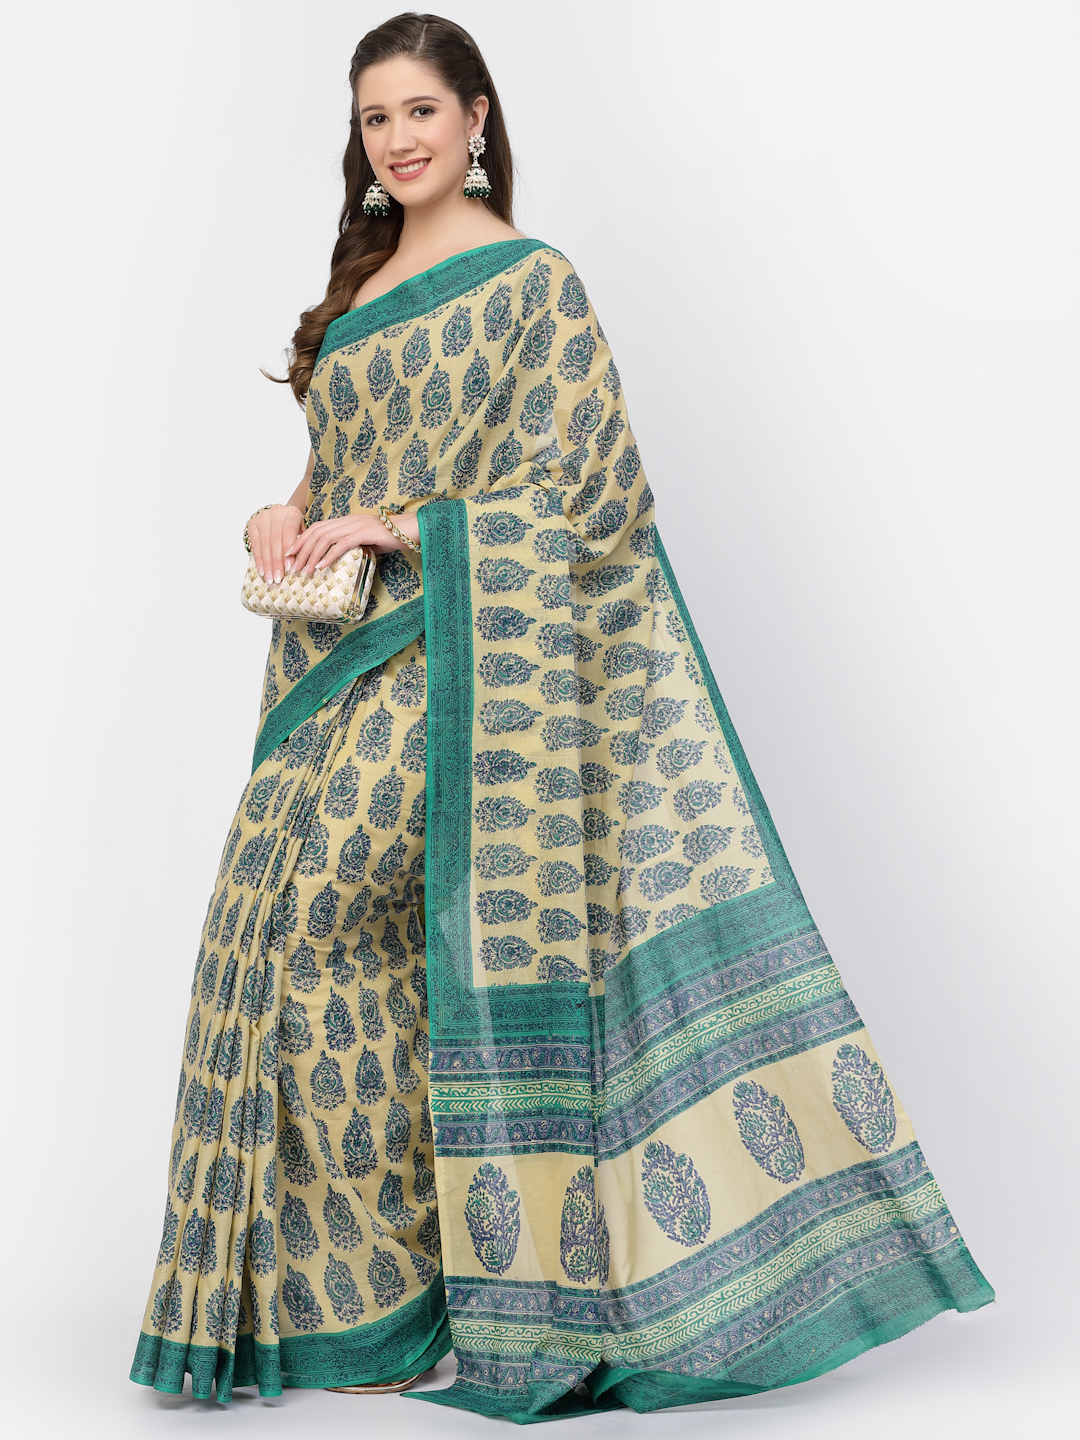 Floral Printed Women's Cotton Floral Printed Saree with Unstitched Blouse